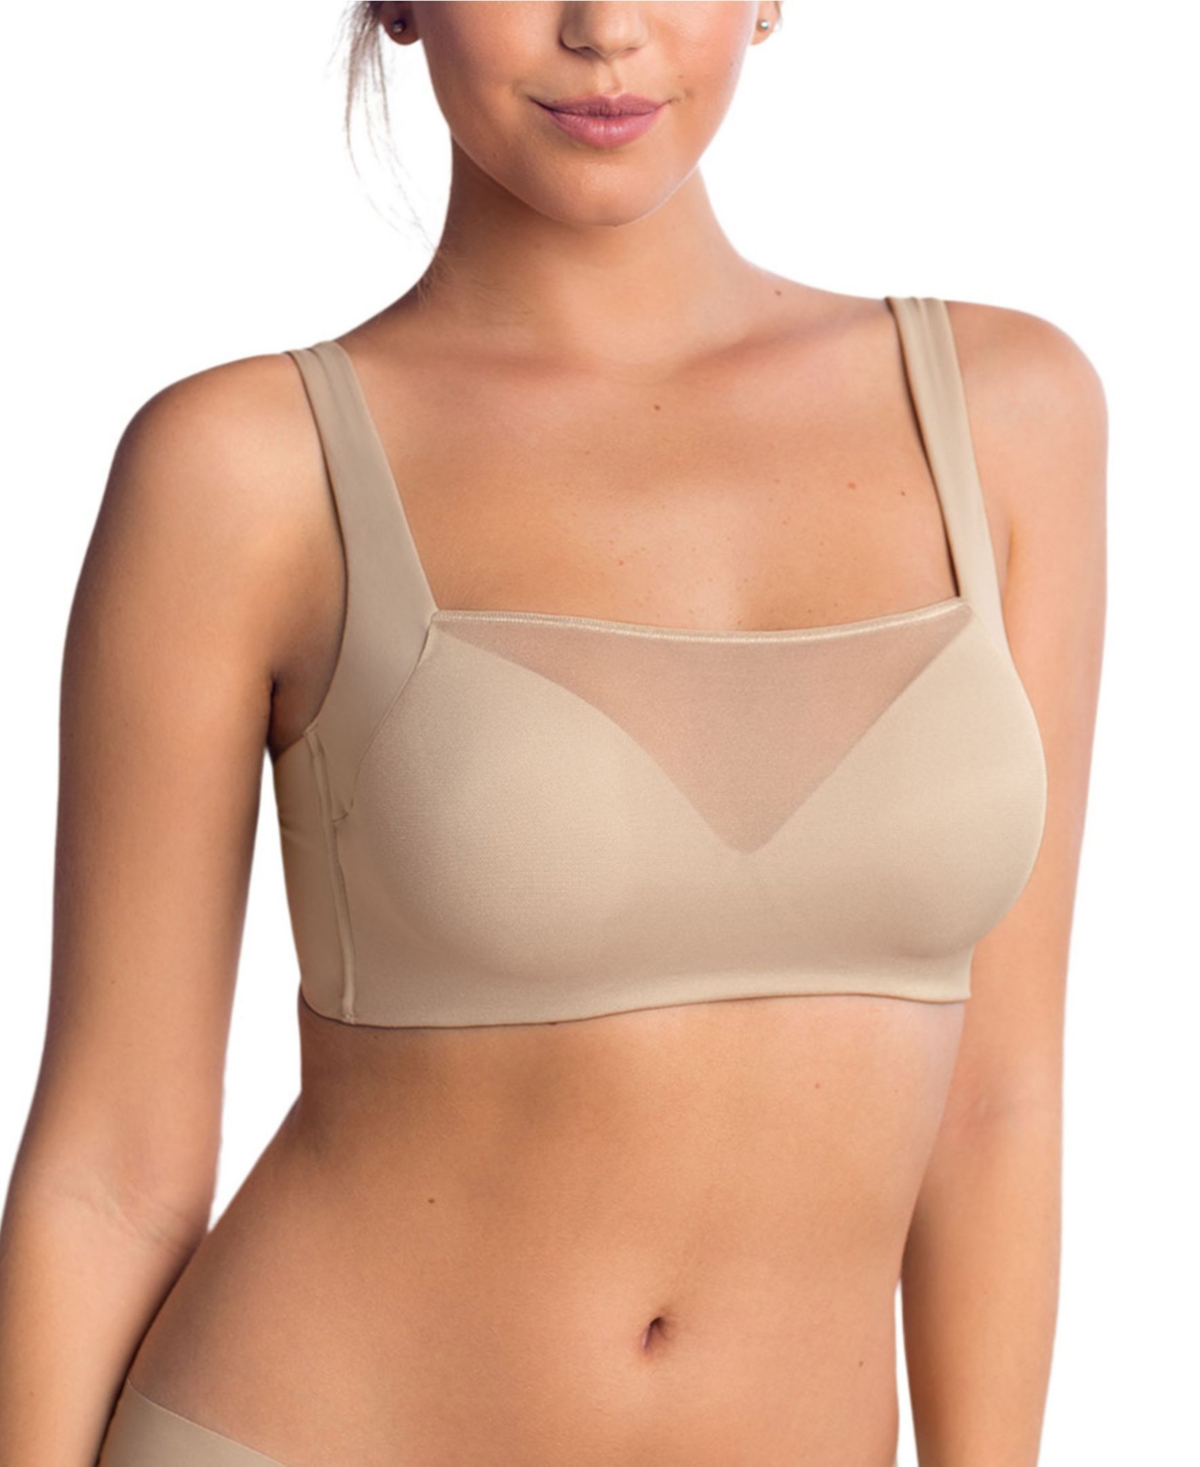 Leonisa Women's Supportive Contouring Bra with Underwire, 091086 - Macy's